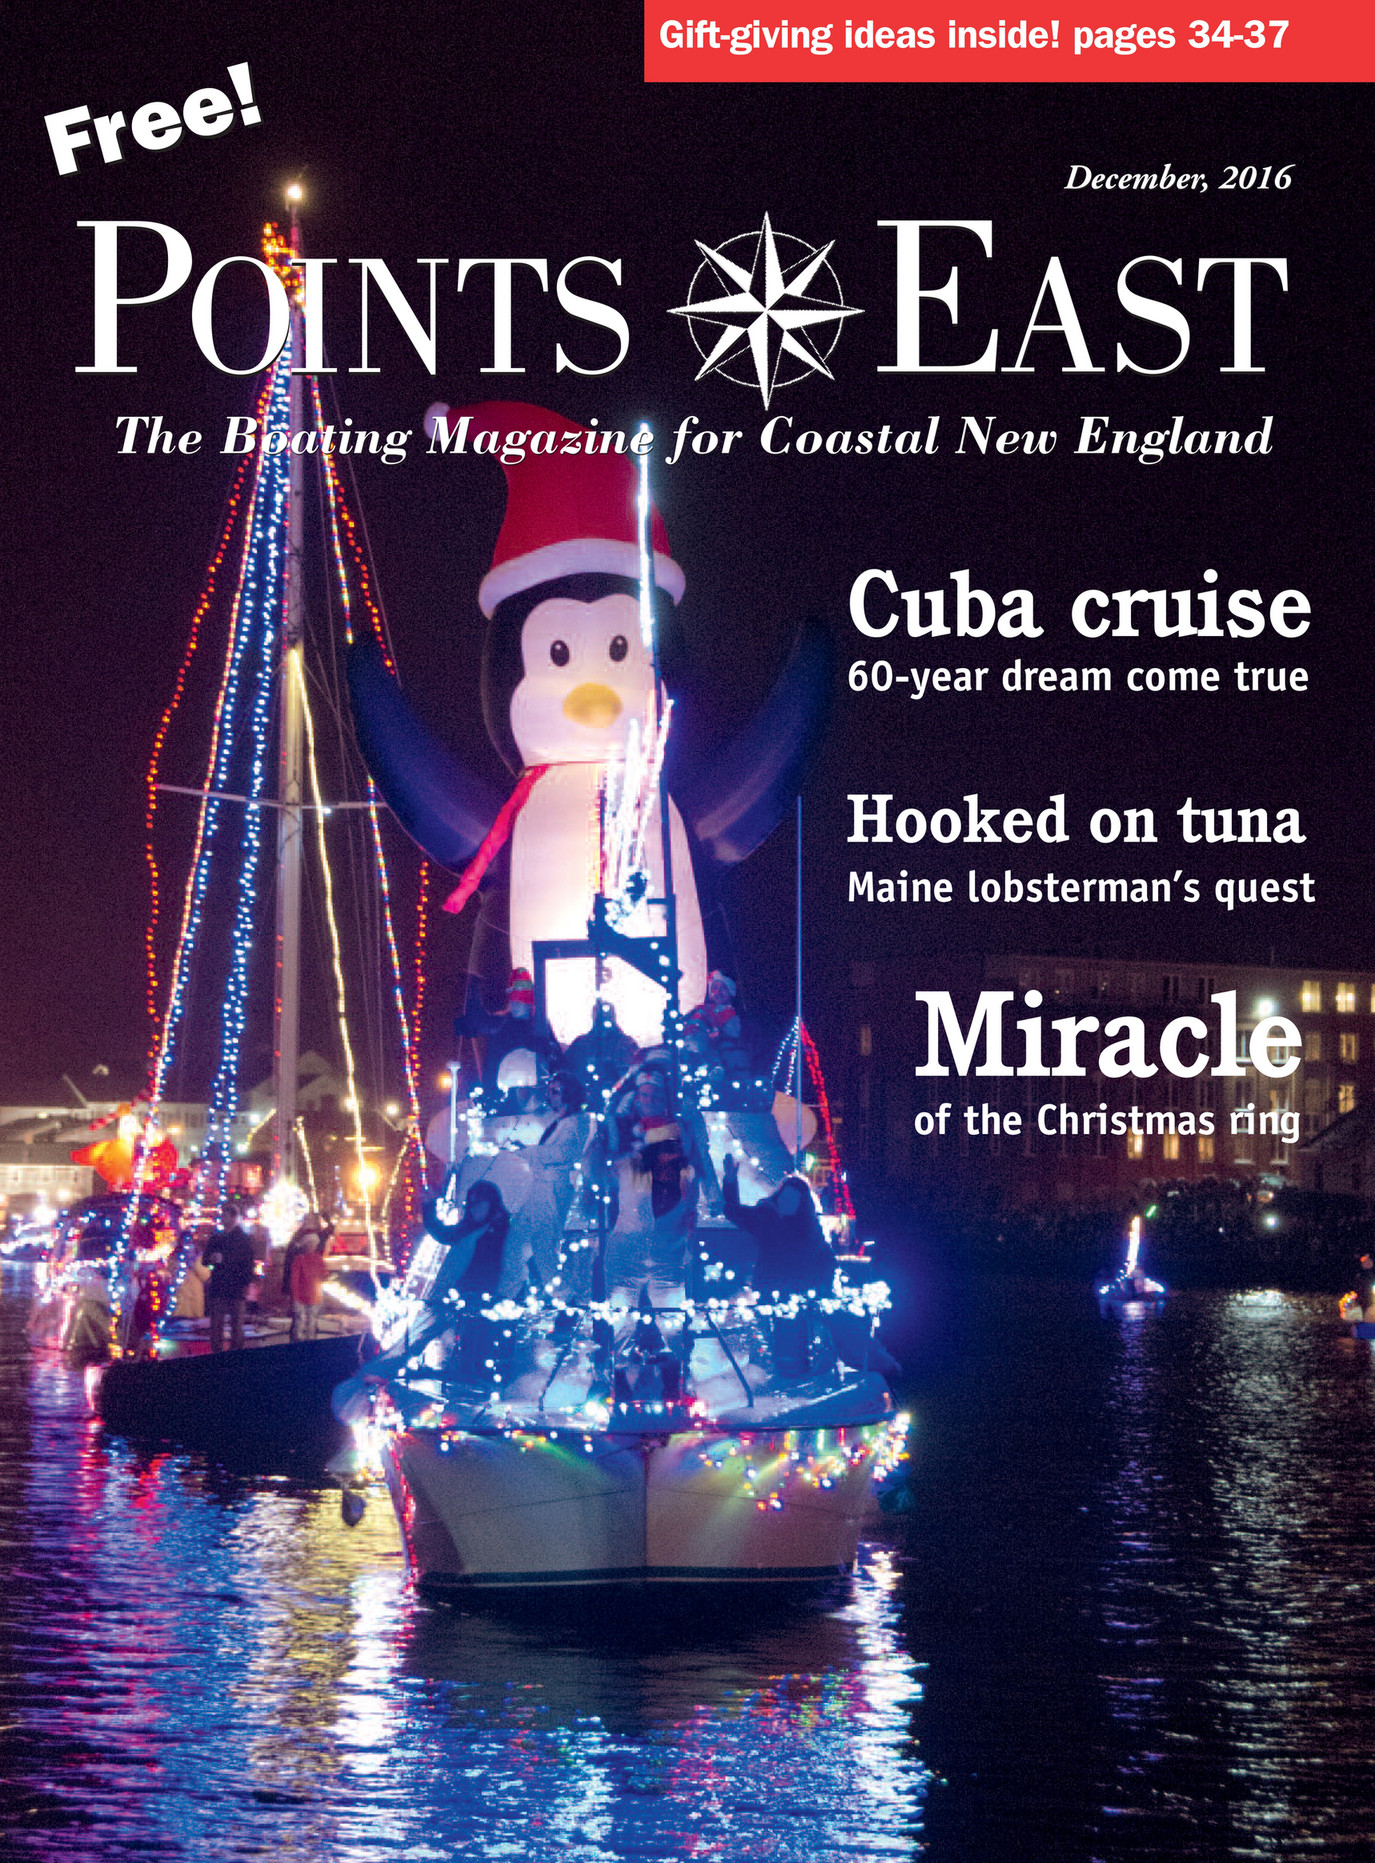 points-east-magazine-points-east-magazine-december-2016-page-30-31